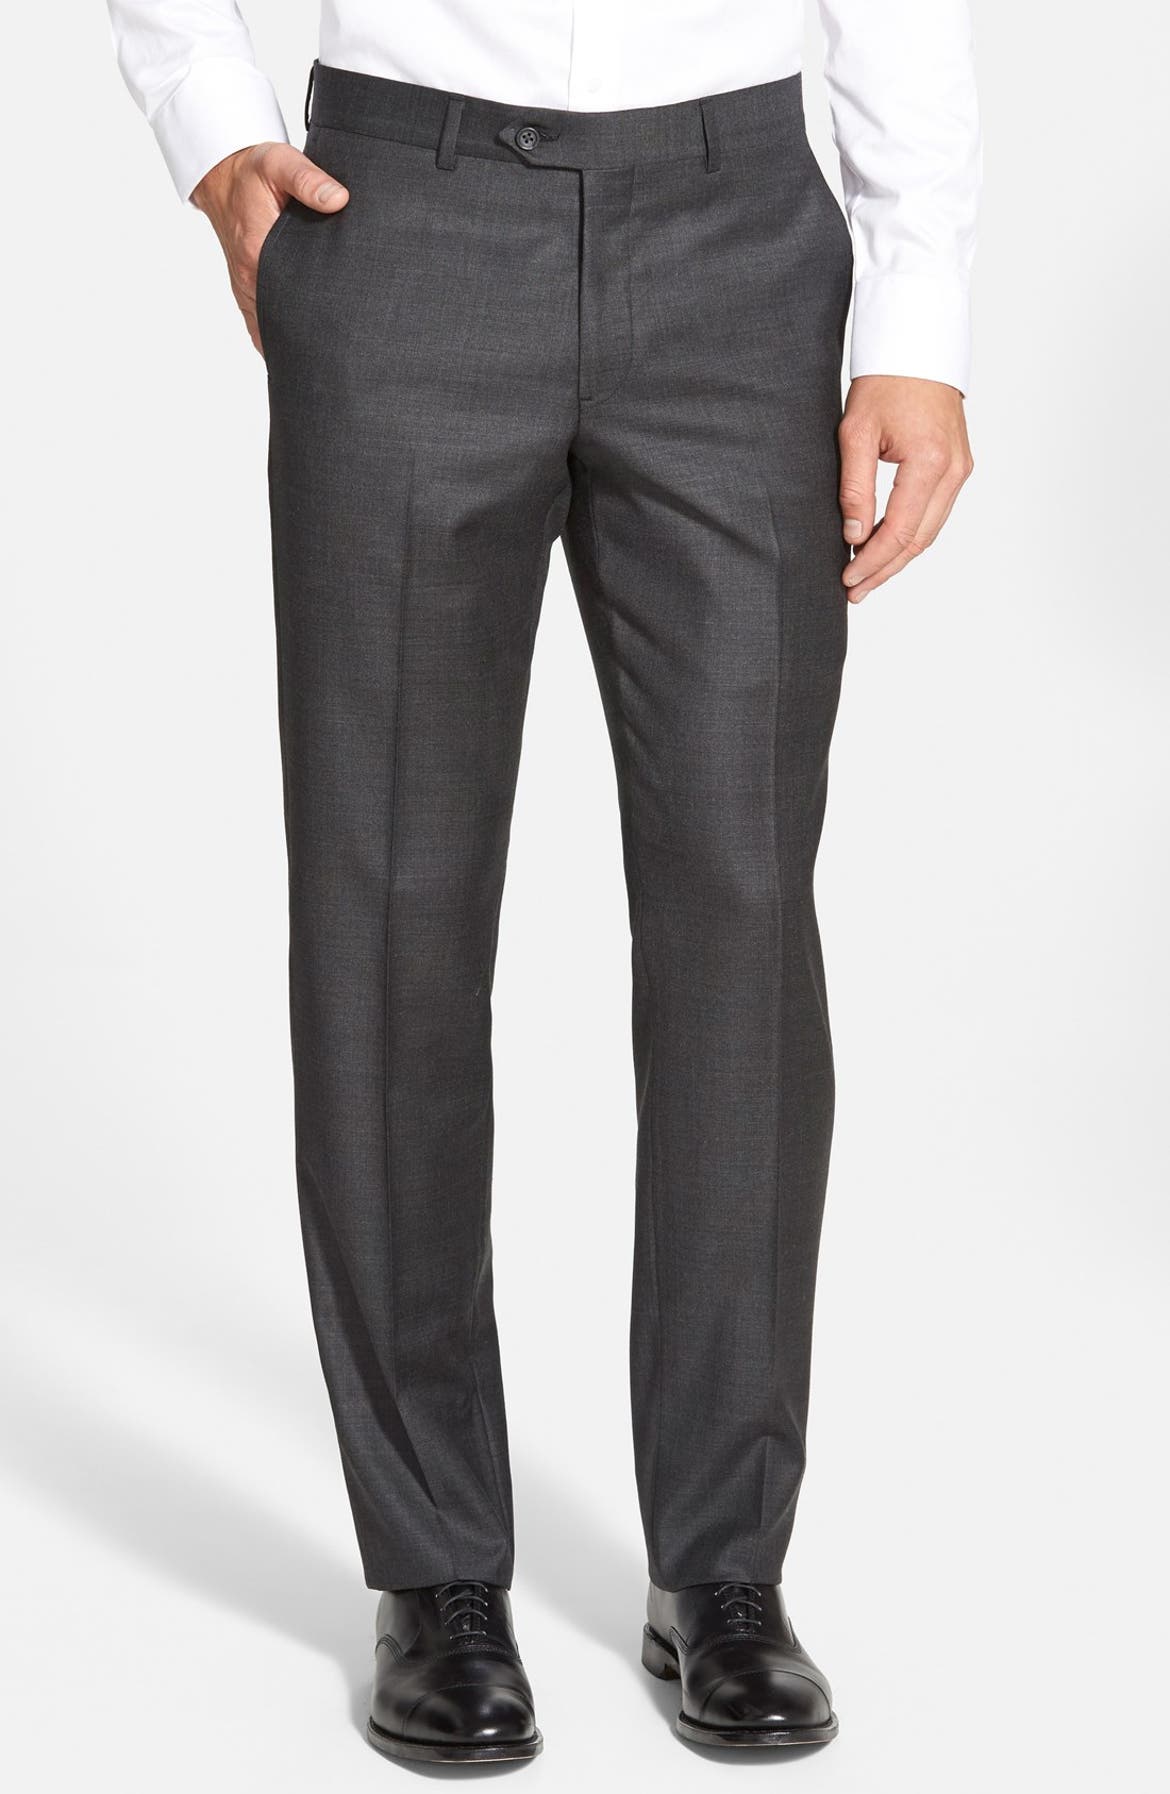 Nordstrom Men's Shop Flat Front Solid Wool Trousers | Nordstrom